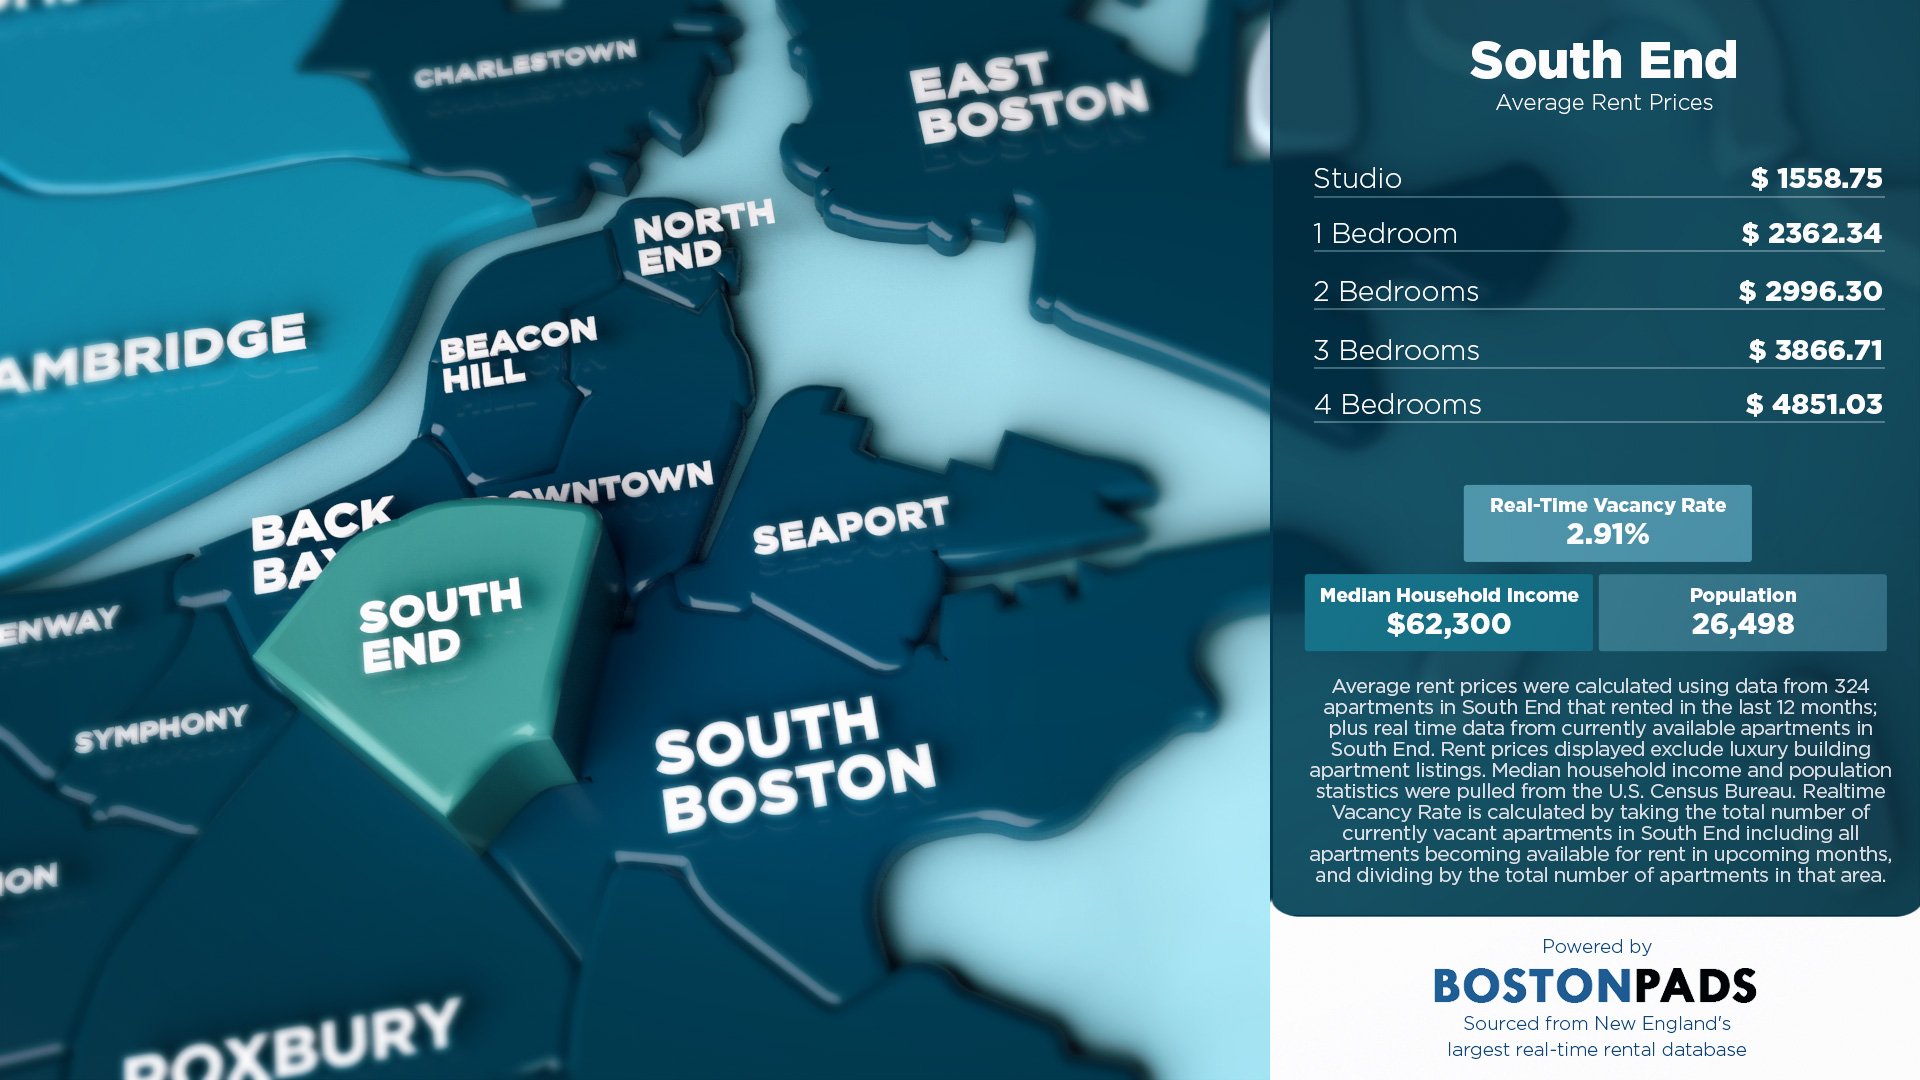 Average Rent Prices in South End